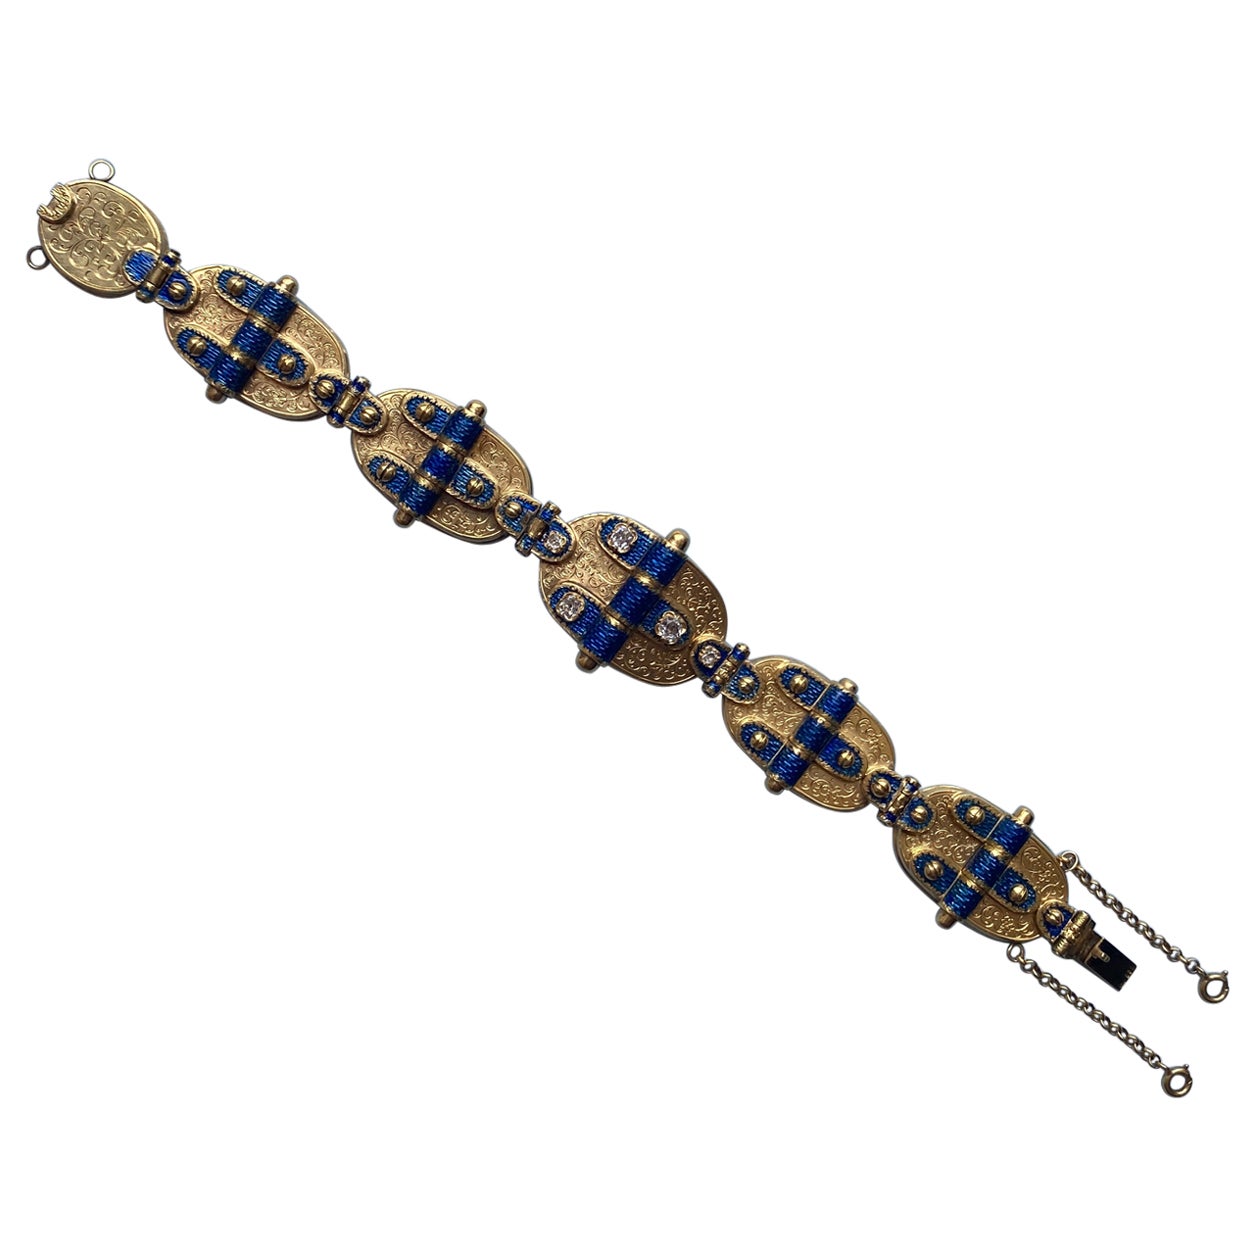 An 14 Carat Yellow Gold Antique Bracelet with Enamel and DIamonds